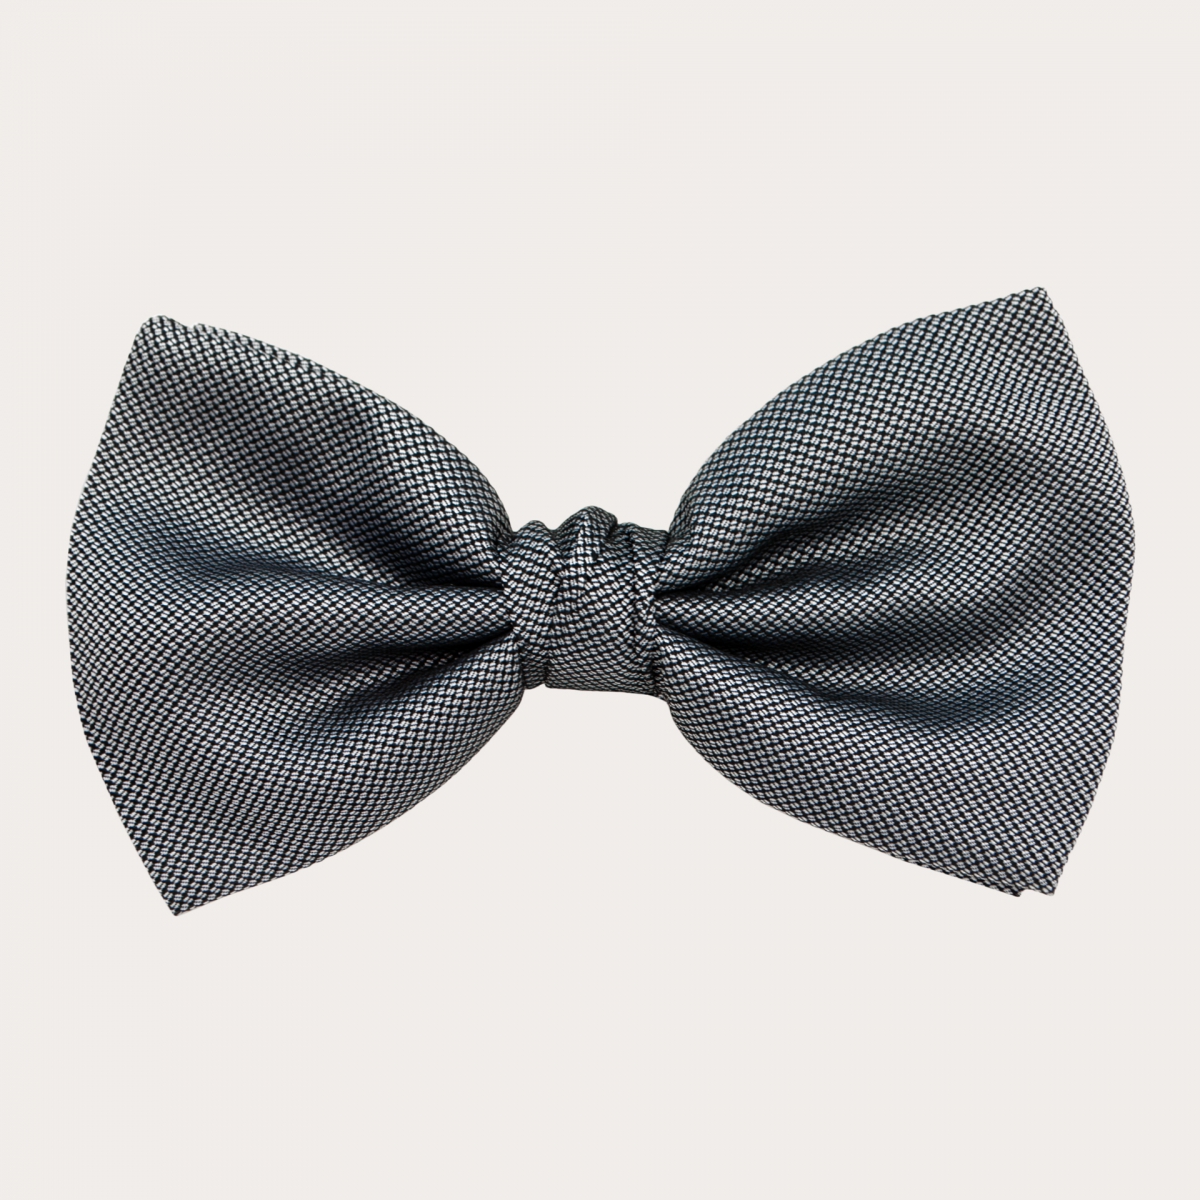 Elegant men's bow tie in jacquard silk with black and white micro-pattern